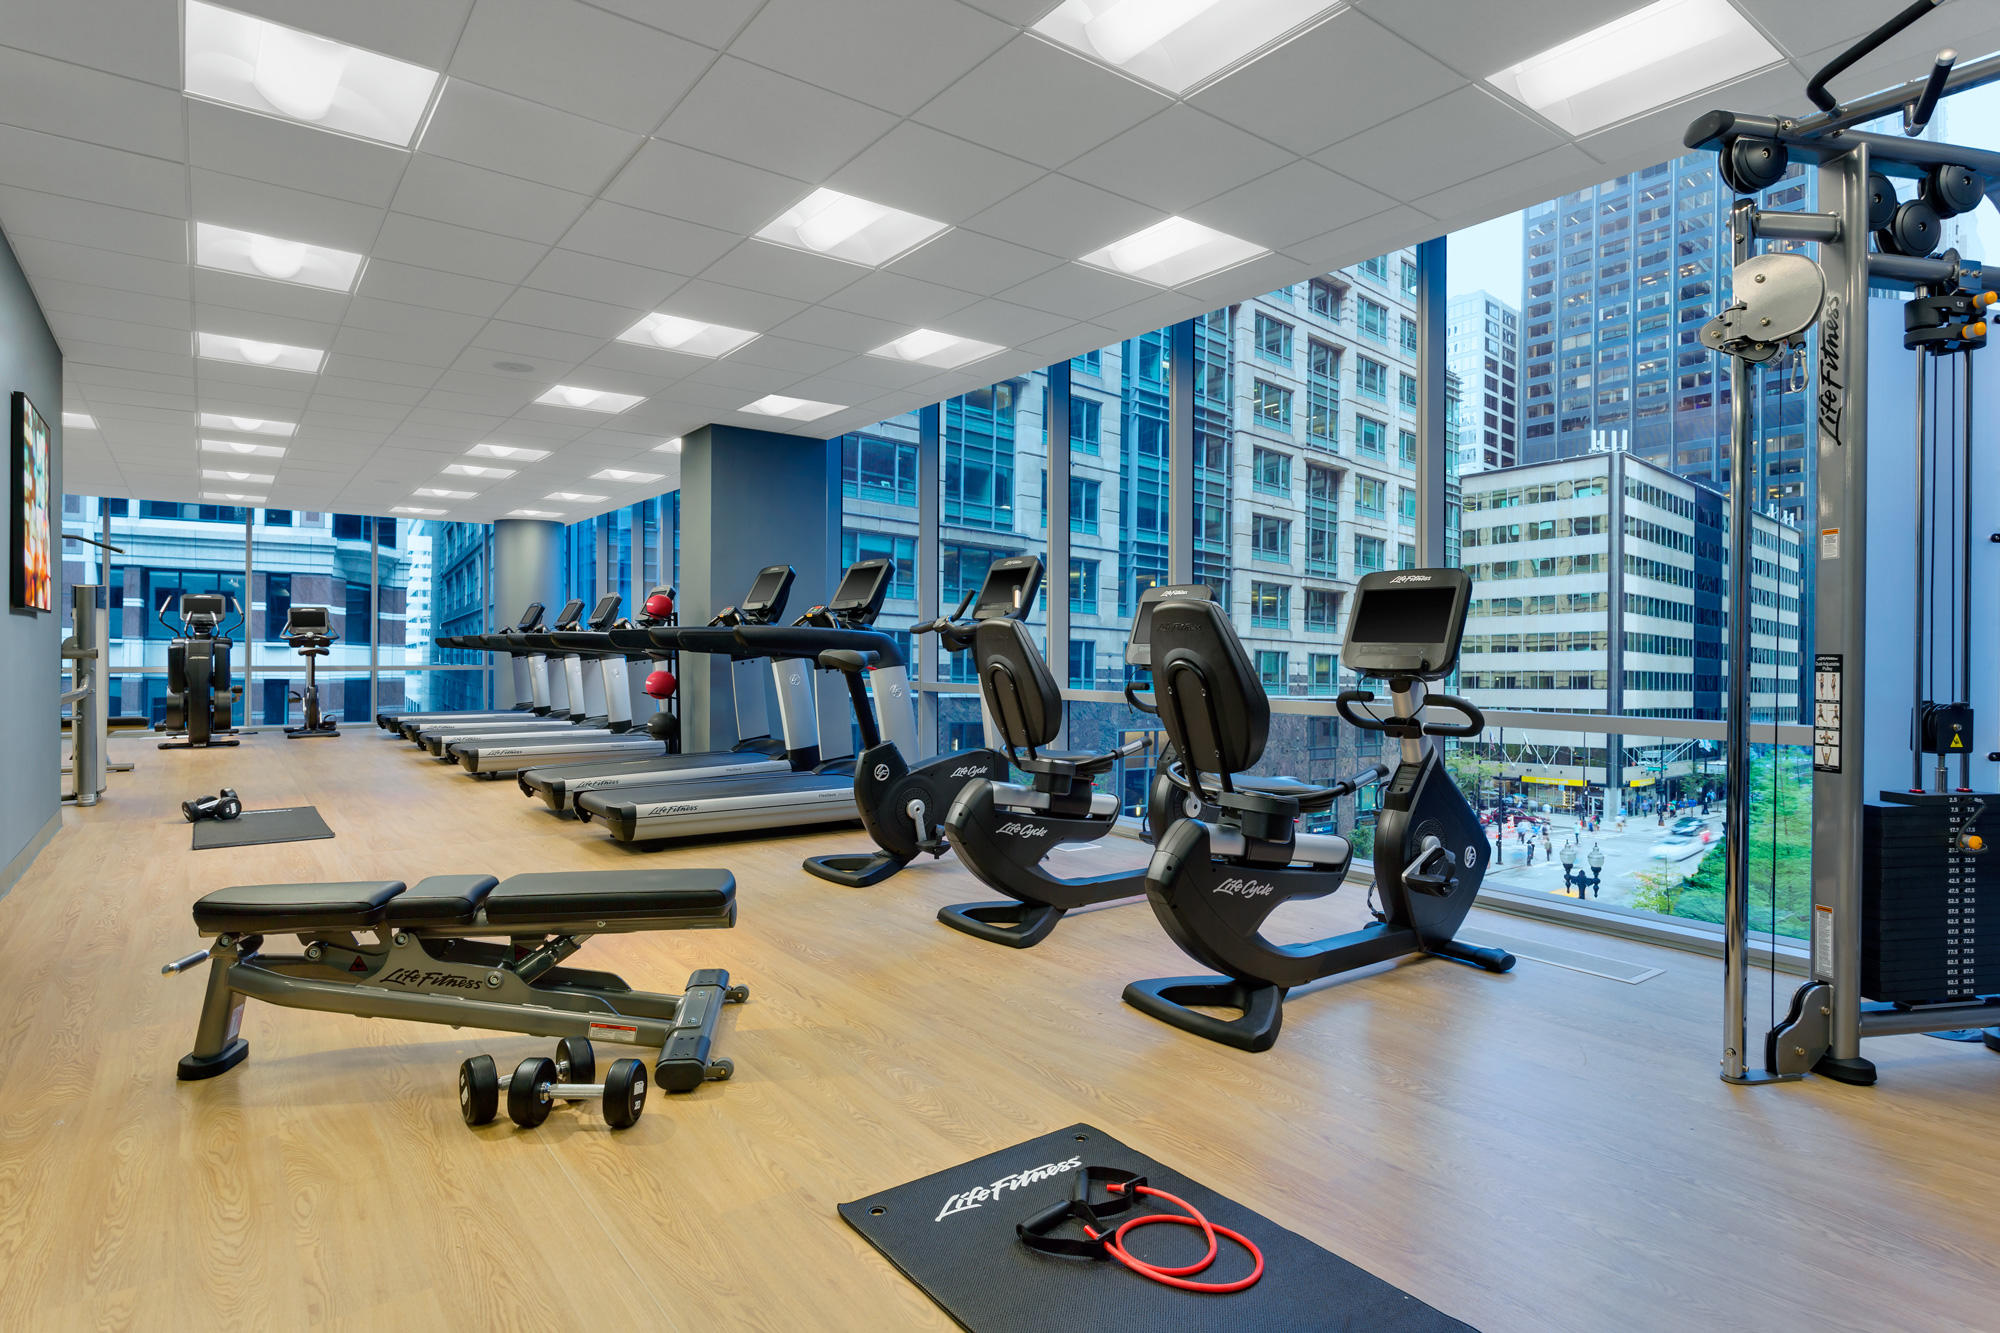 Keep up your fitness routine in the large state-of-the-art fitness center within the Hyatt Place Chicago/Downtown-The Loop.